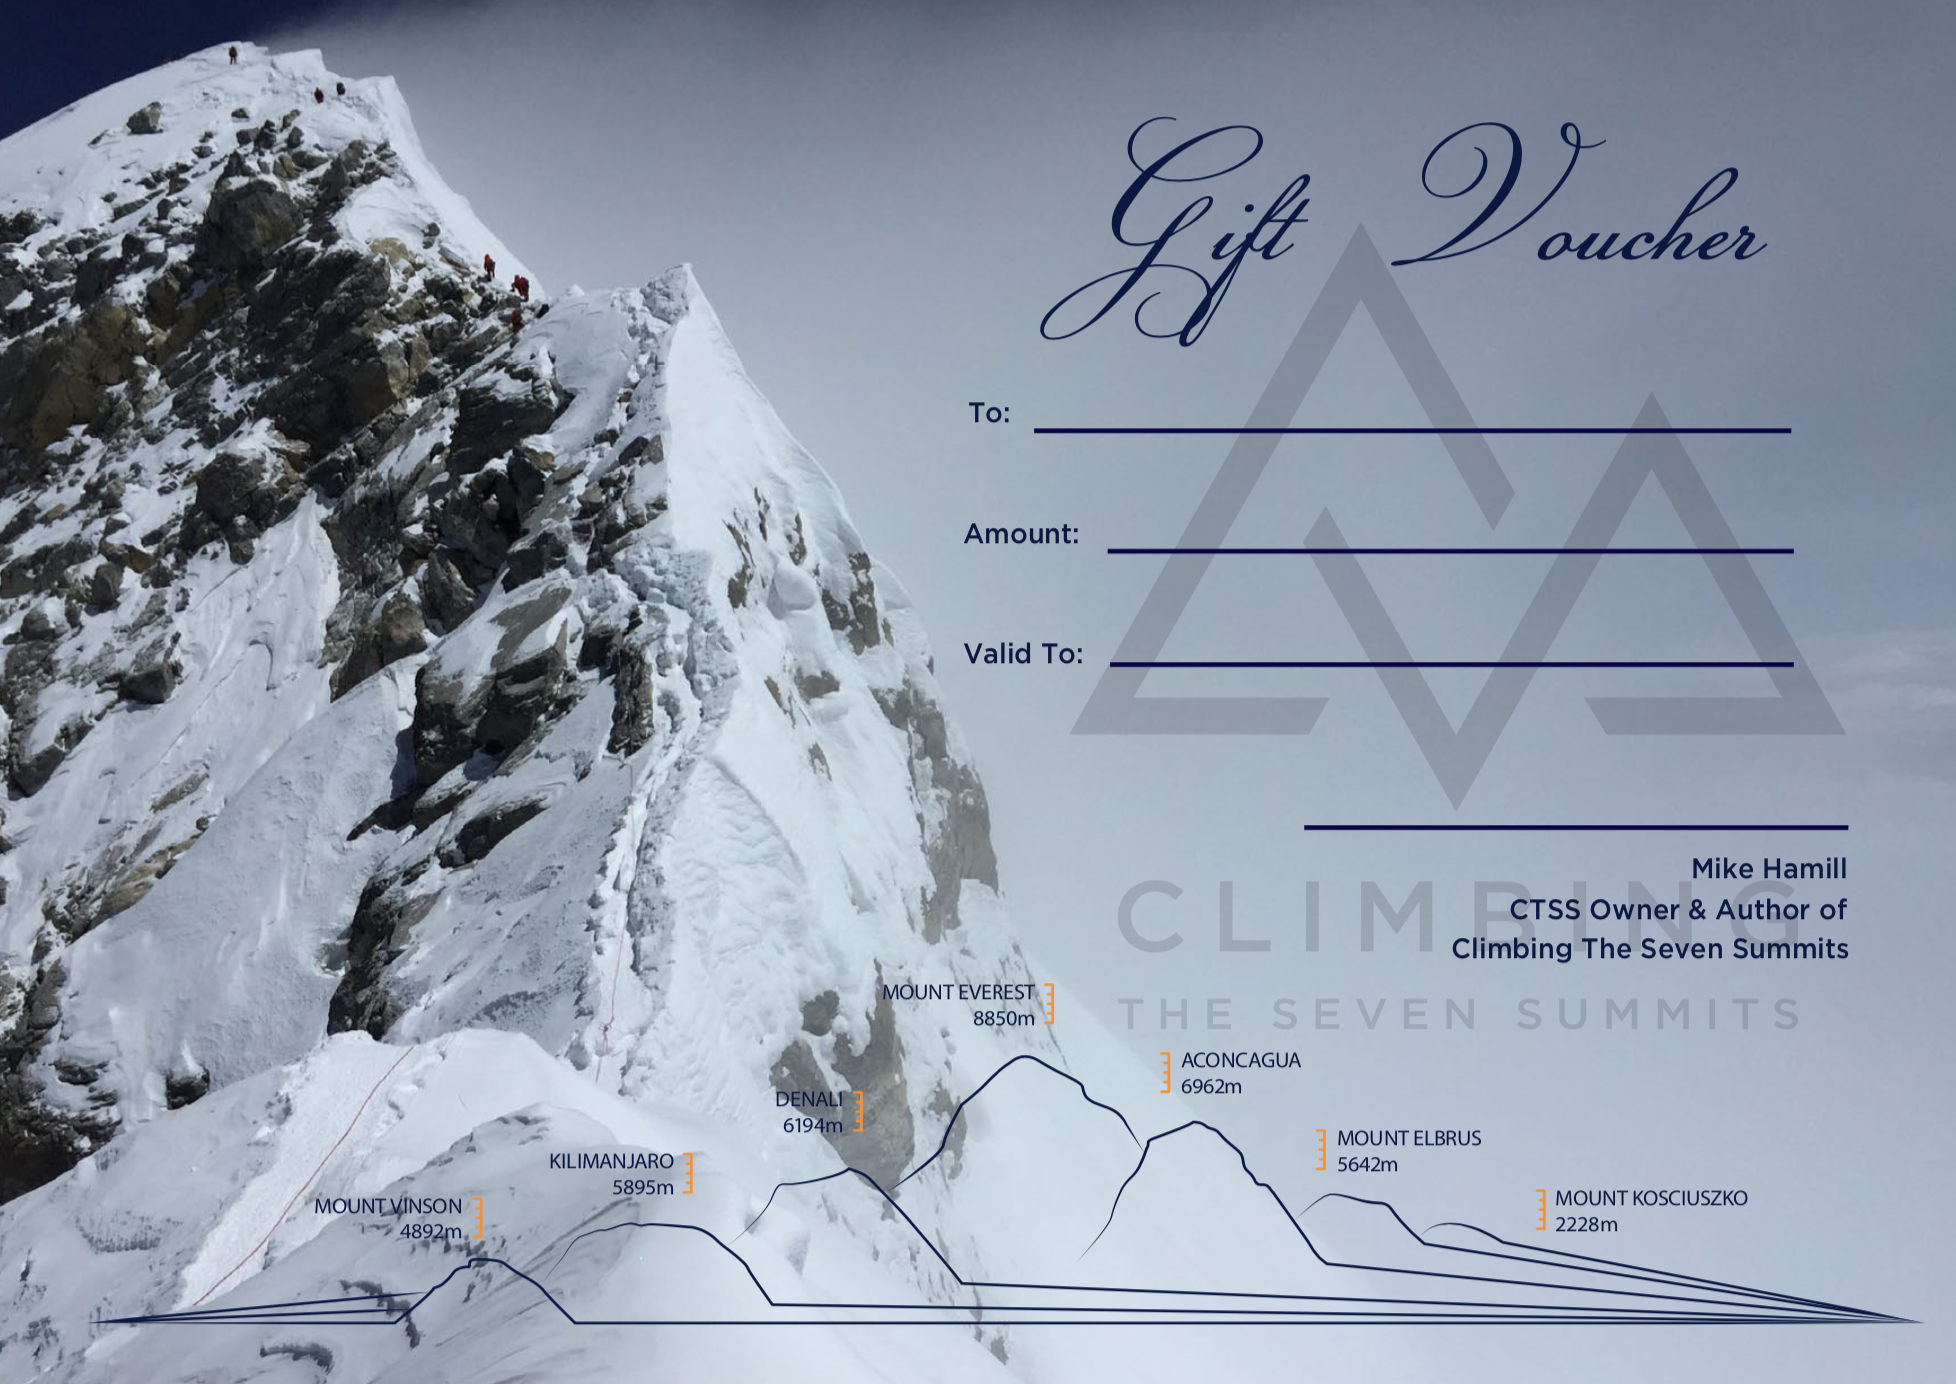 Climbing The Seven Summits Ctss Is A World Leading Mountaineering Expedition Company Specializing In The Seven Summits And Climbing Everest Our Guiding Priorities Are Your Safety And Success